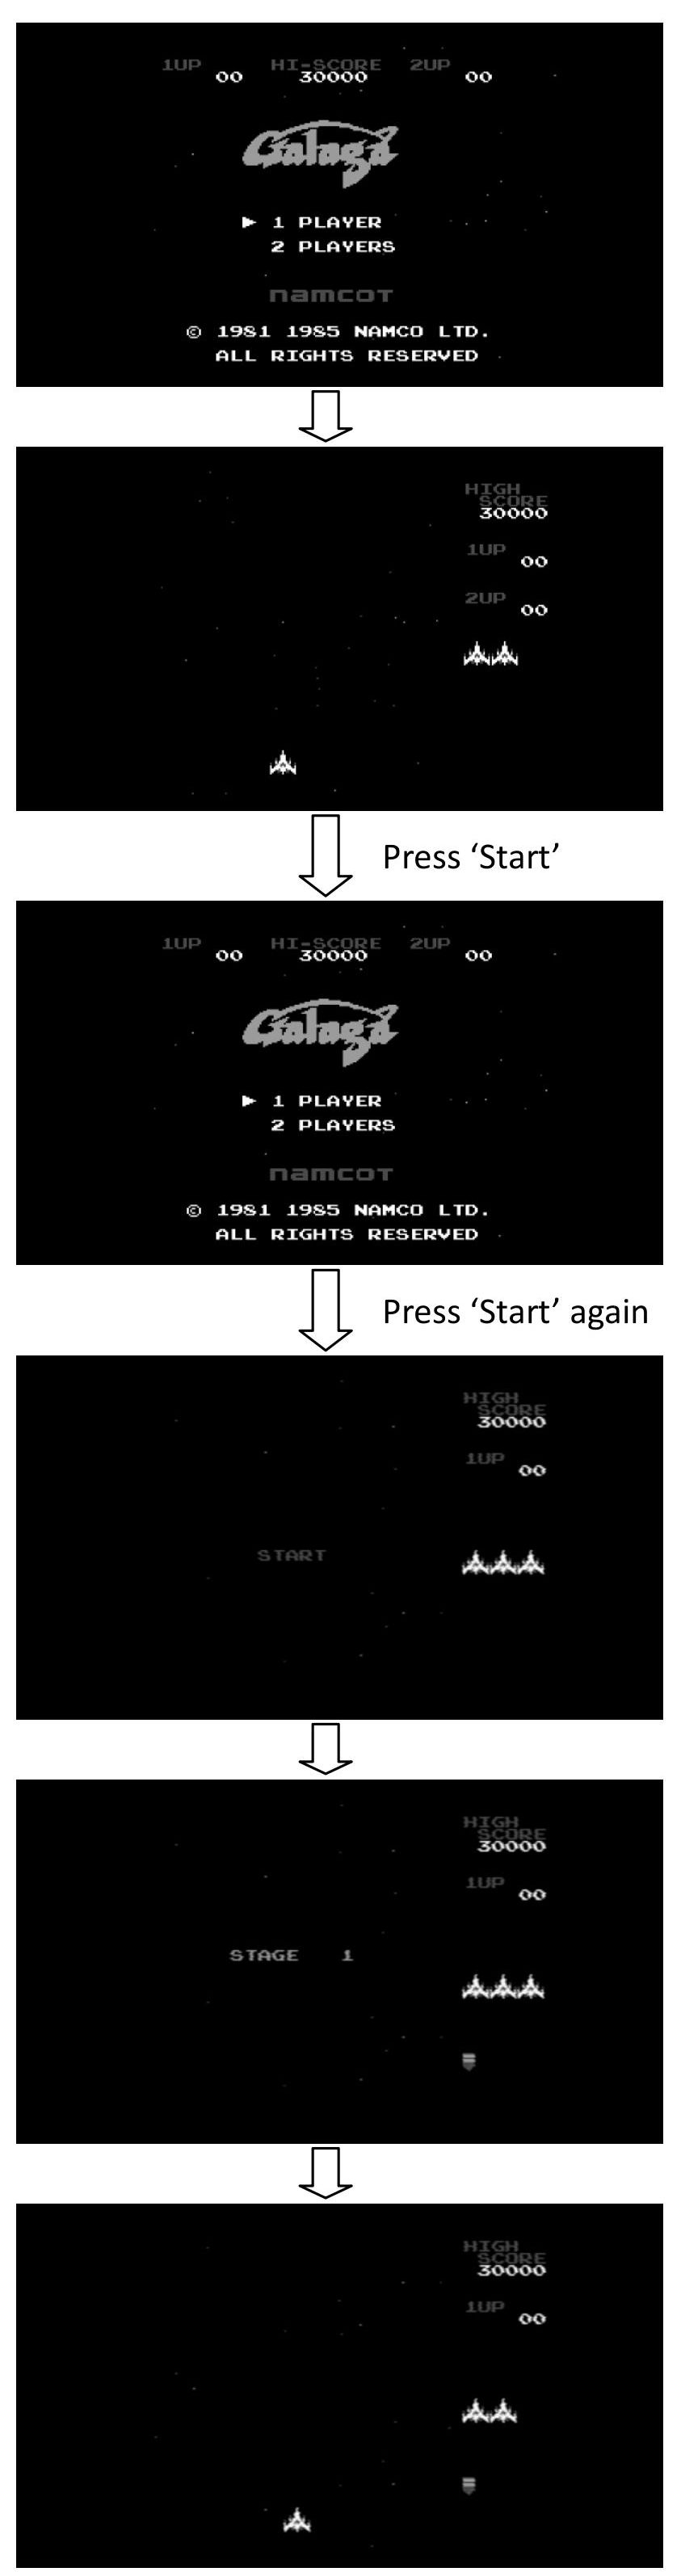 Galaga new game sequence